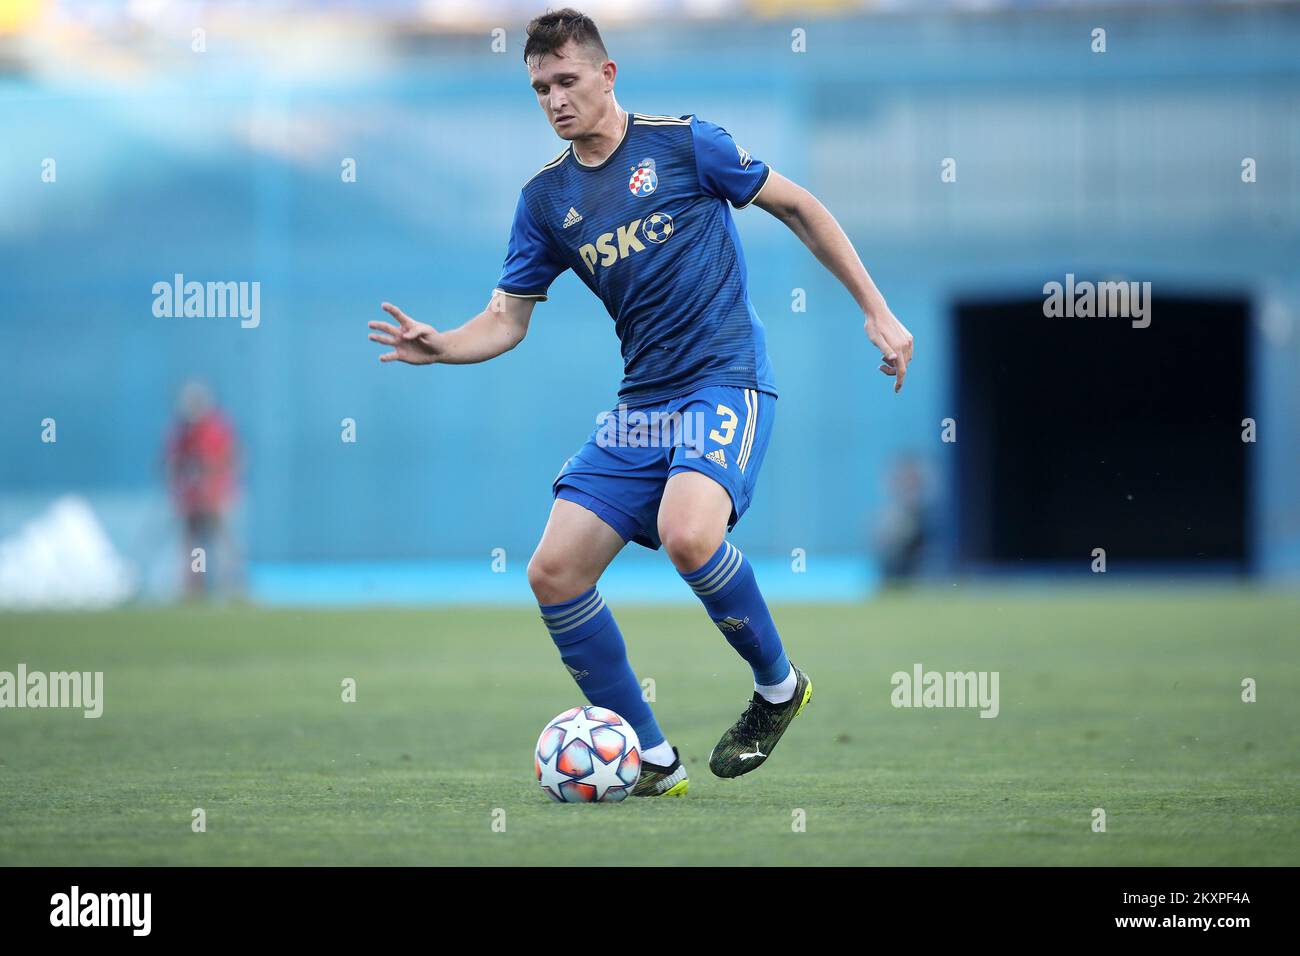 Daniel Stefulj of Dinamo Zagreb in action during UEFA Champions League First Qualifying Round match between GNK Dinamo Zagreb and Valur at Maksimir Stadium in Zagreb, Croatia on July 7, 2021. Photo: Igor Kralj/PIXSELL Stock Photo